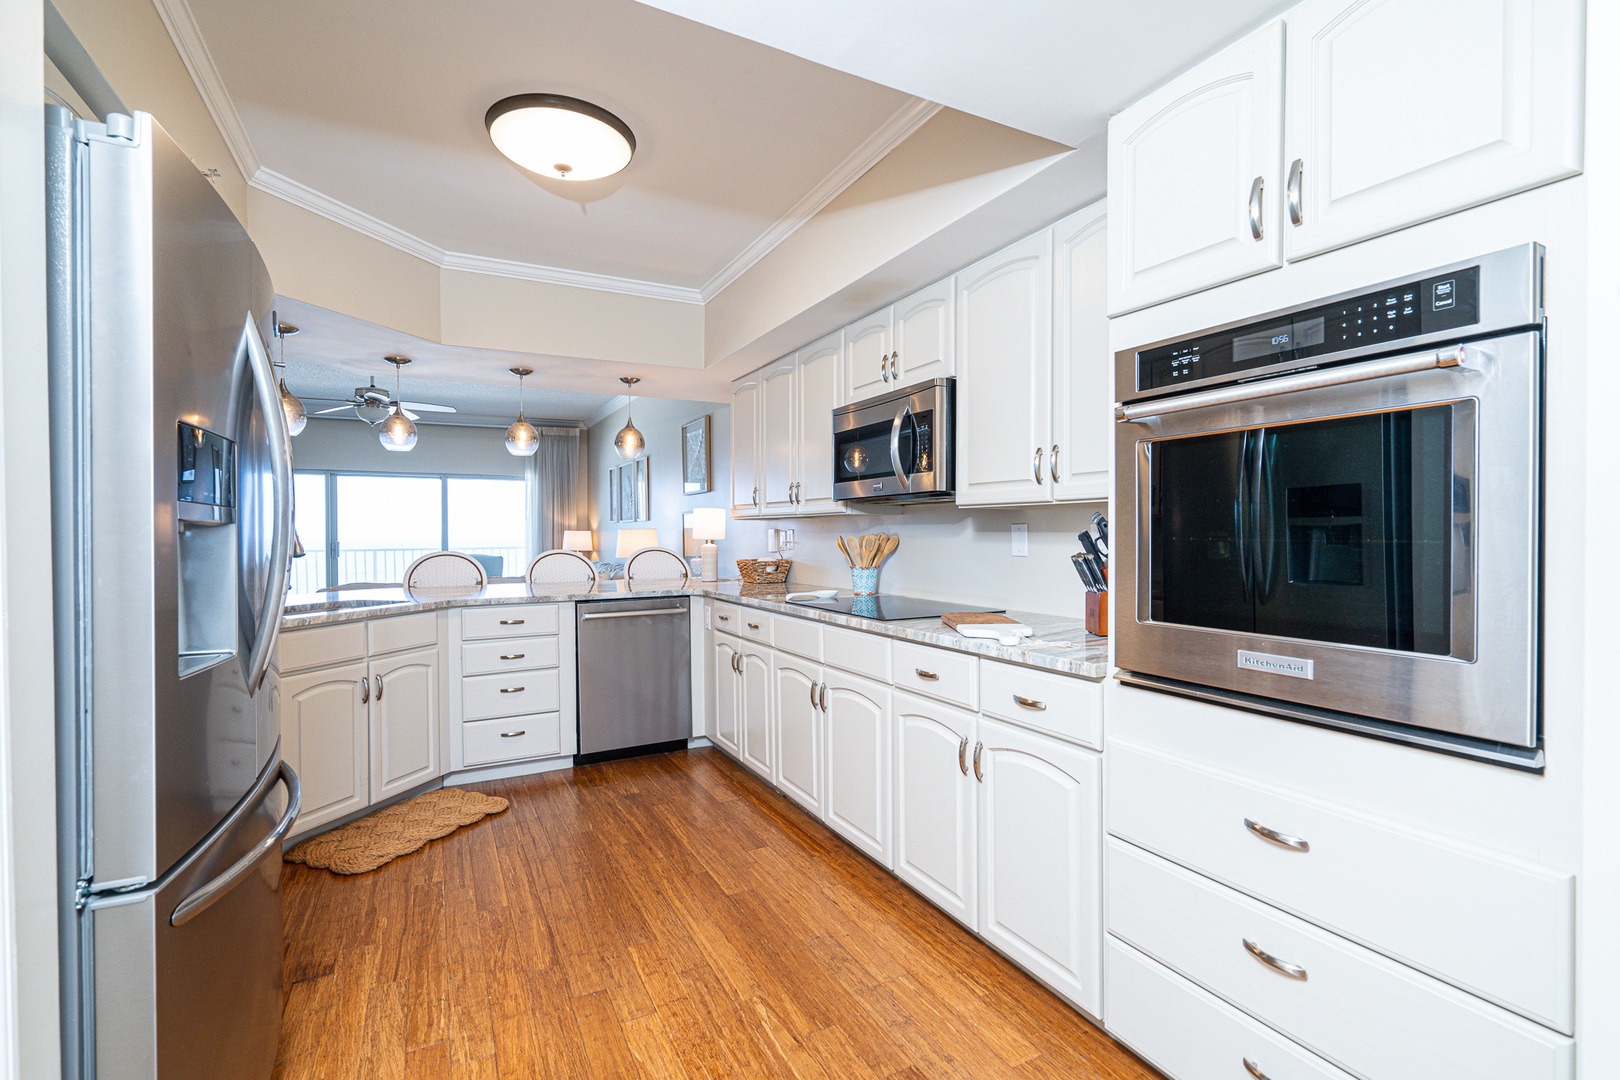 The open, airy kitchen offers ample space & all the comforts of home